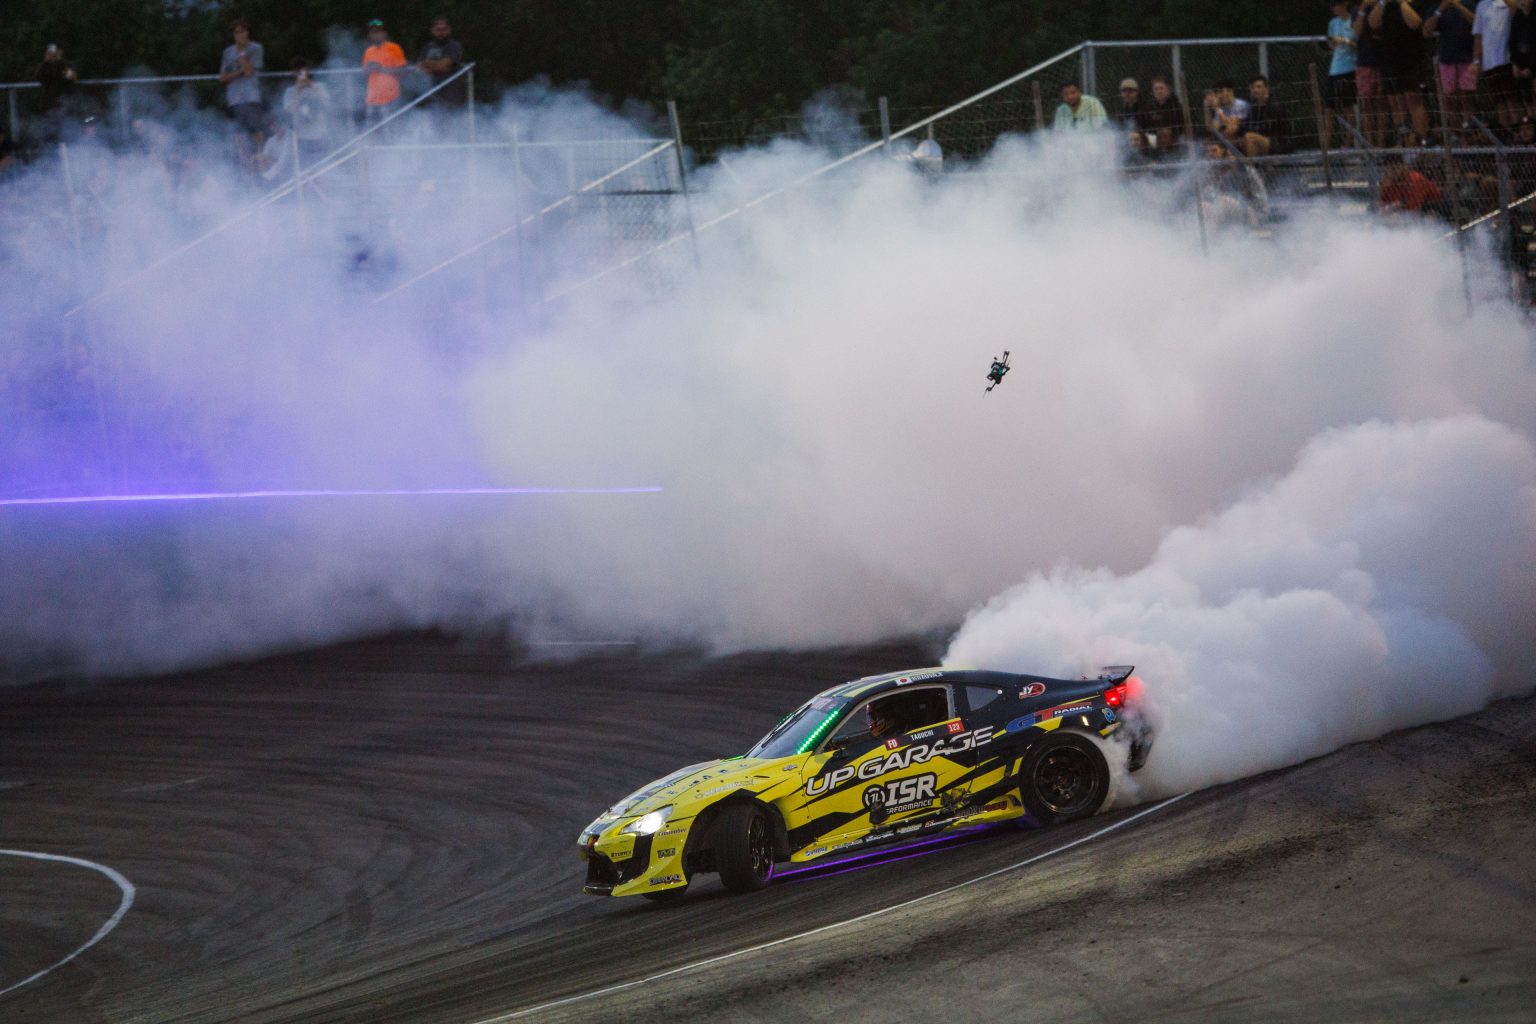 QUALIFYING RESULTS FROM ROUND 3 OF 2023 FORMULA DRIFT PRO CHAMPIONSHIP